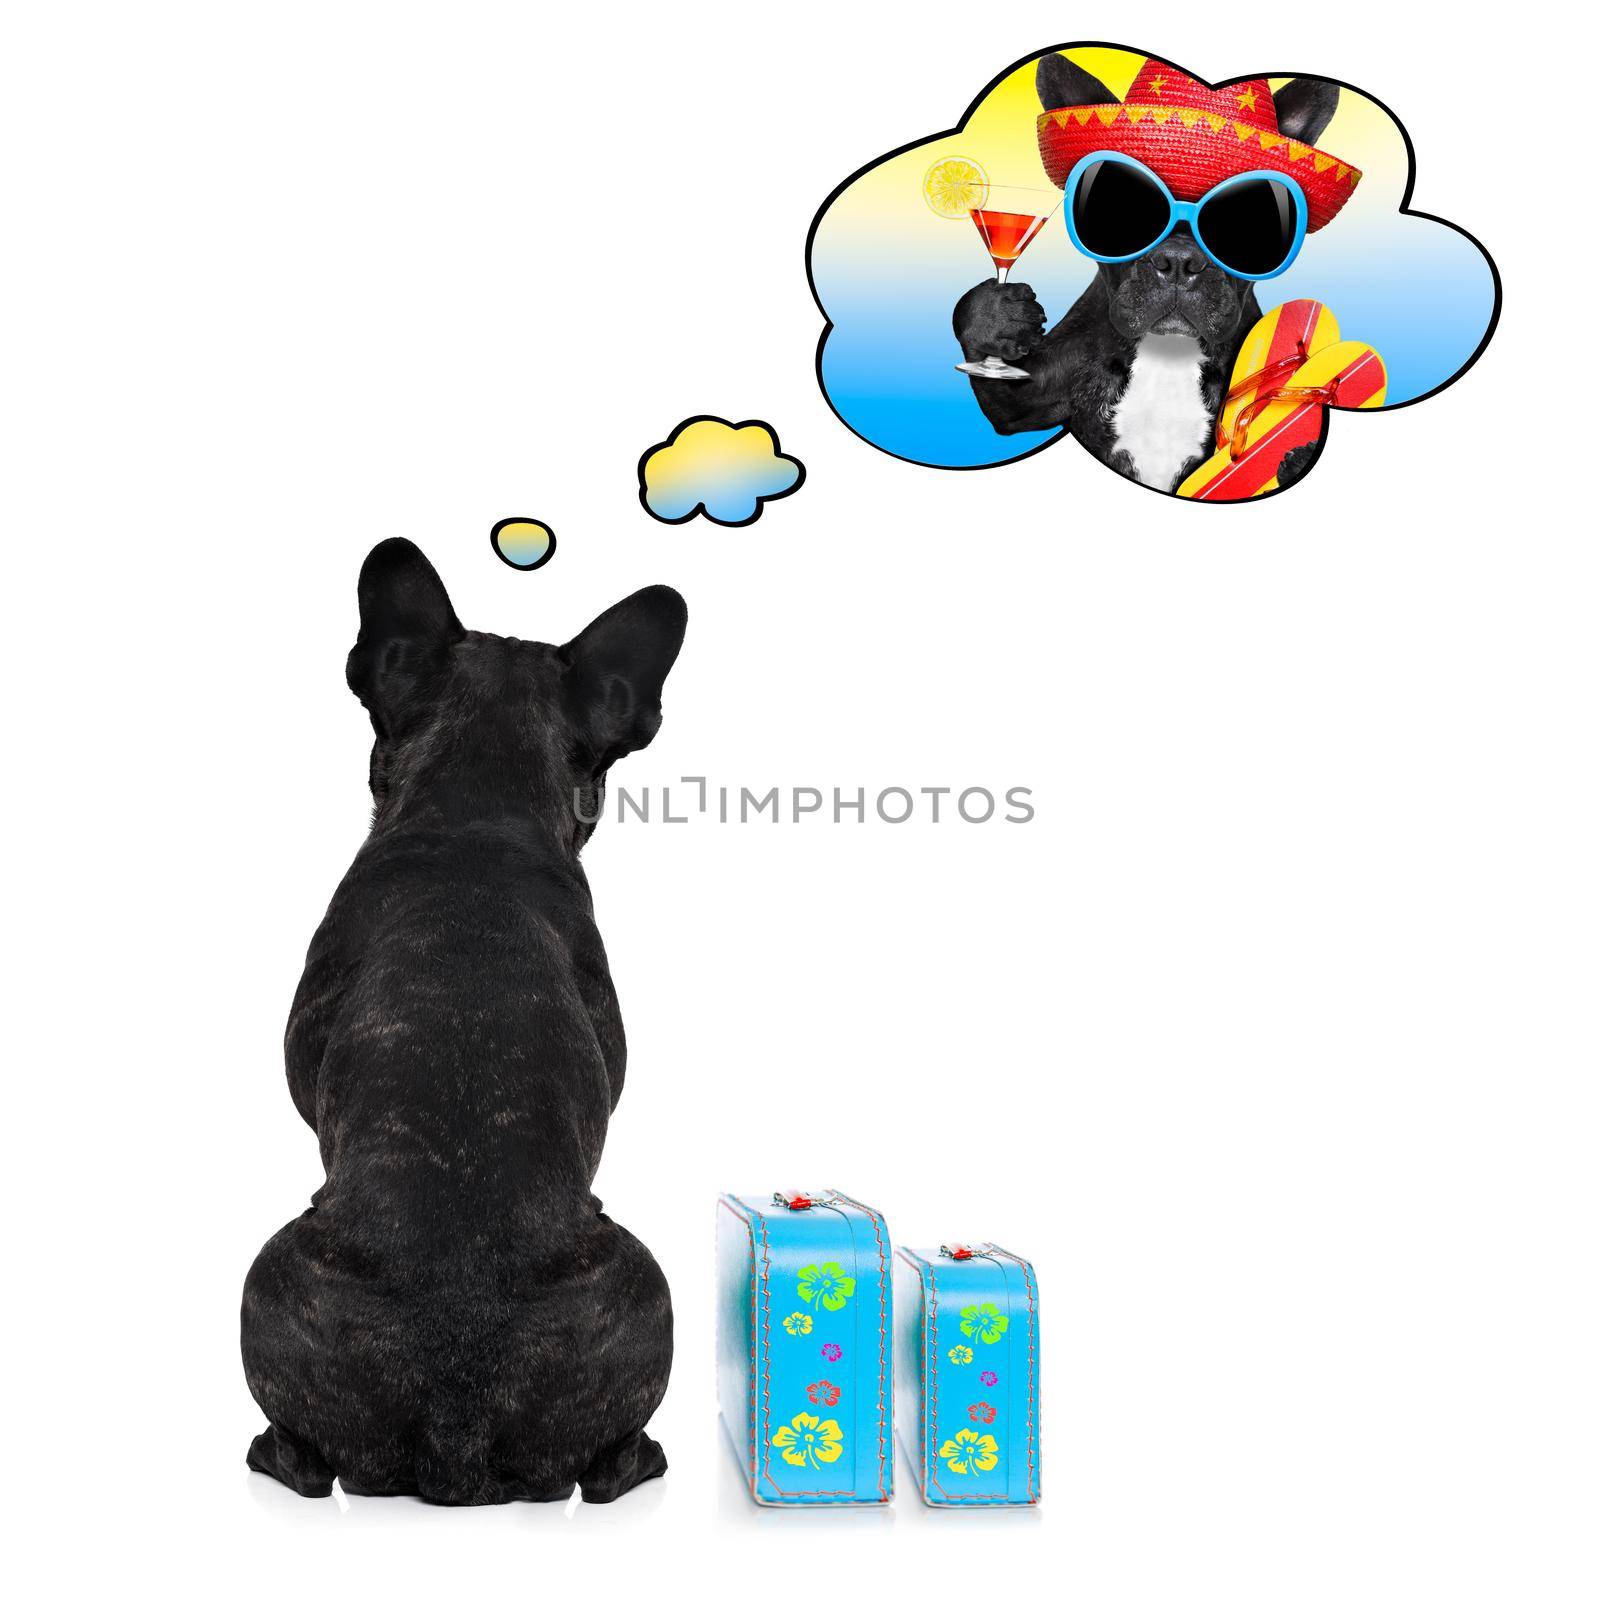 french bulldog  dog thinking about the summer vacation holidays with cocktails,  isolated on white background, ready to depart with luggage and bags